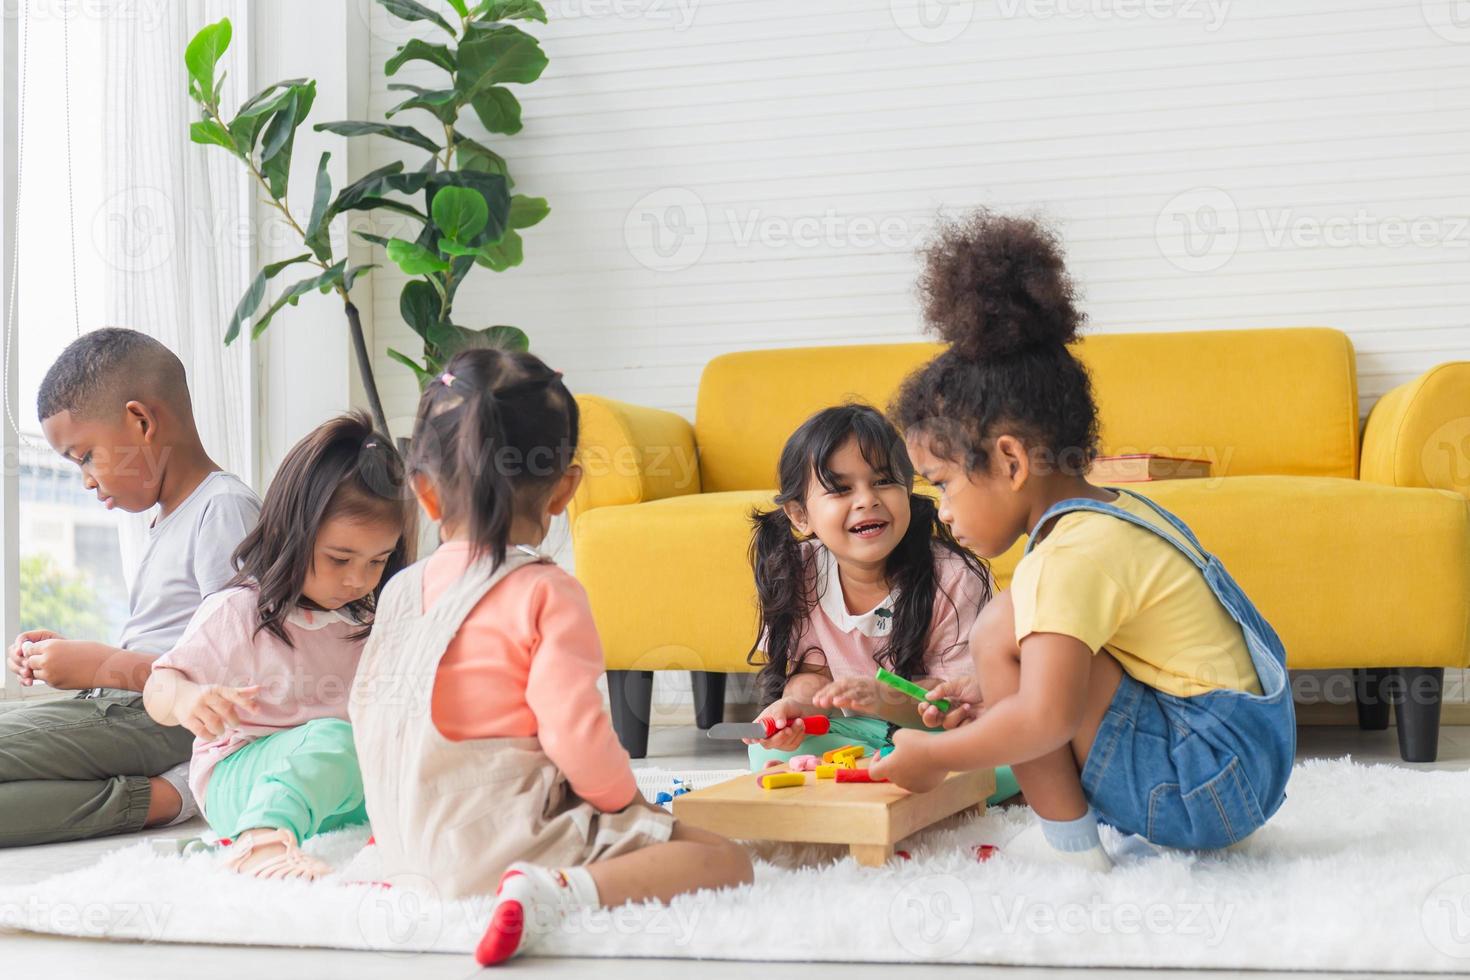 Cute little children playing toys in living room, Diverse children enjoying playing with toys photo